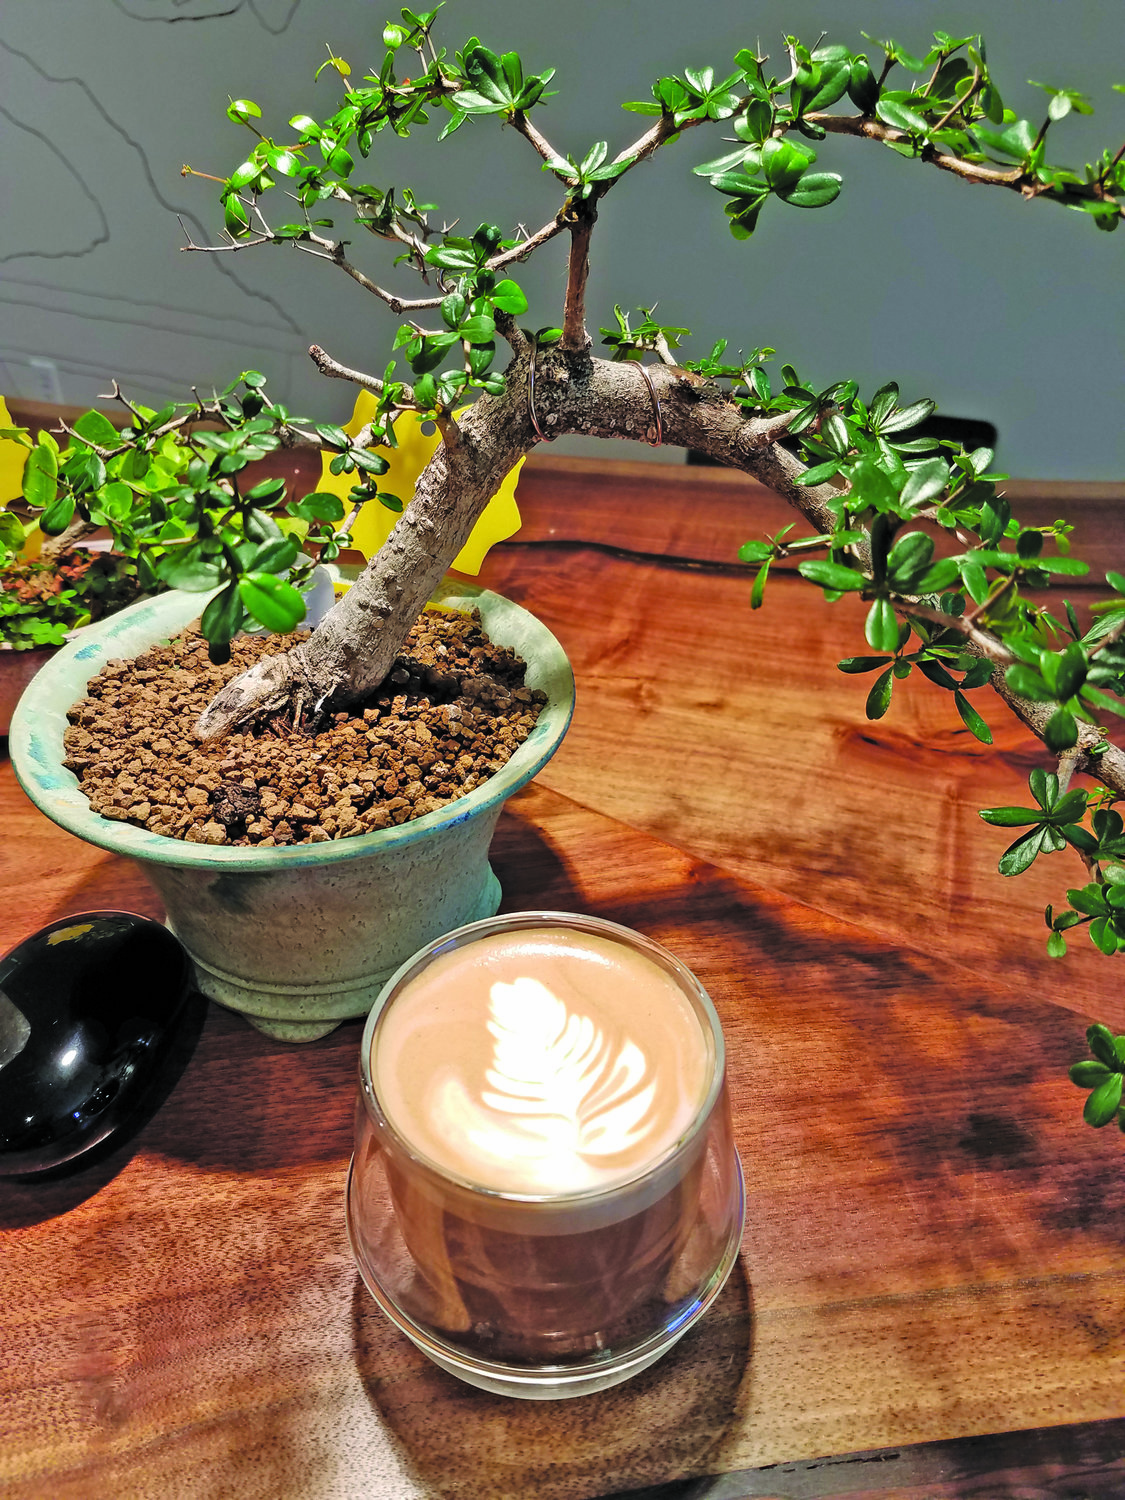 Specialty lattes with floral decorations and bonsai trees are among the items for sale at Amsterdam Coffee Bar.